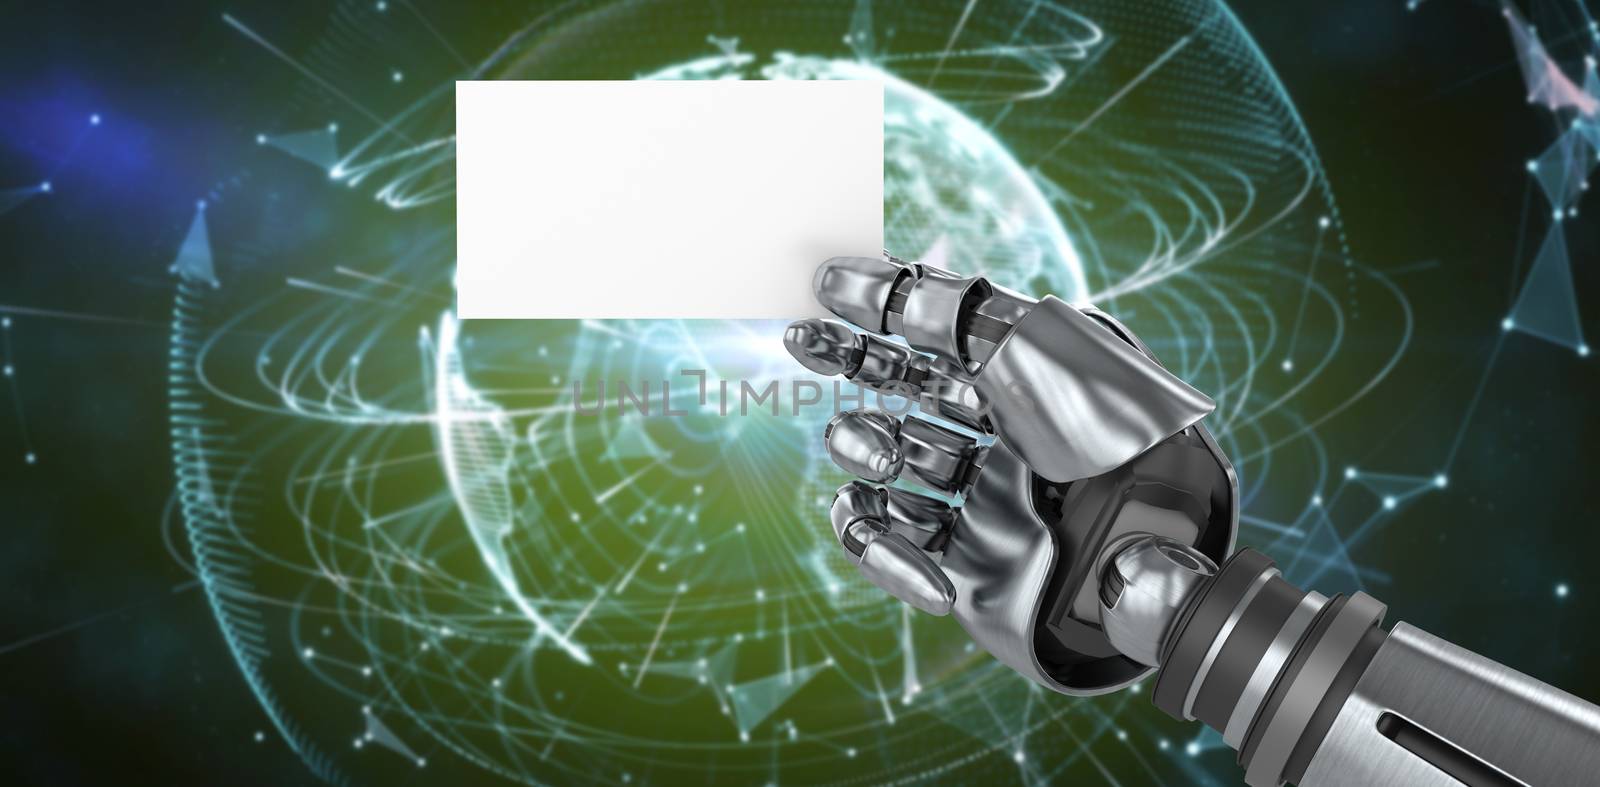 Composite image of computer graphic image of robotic arm holding placard by Wavebreakmedia